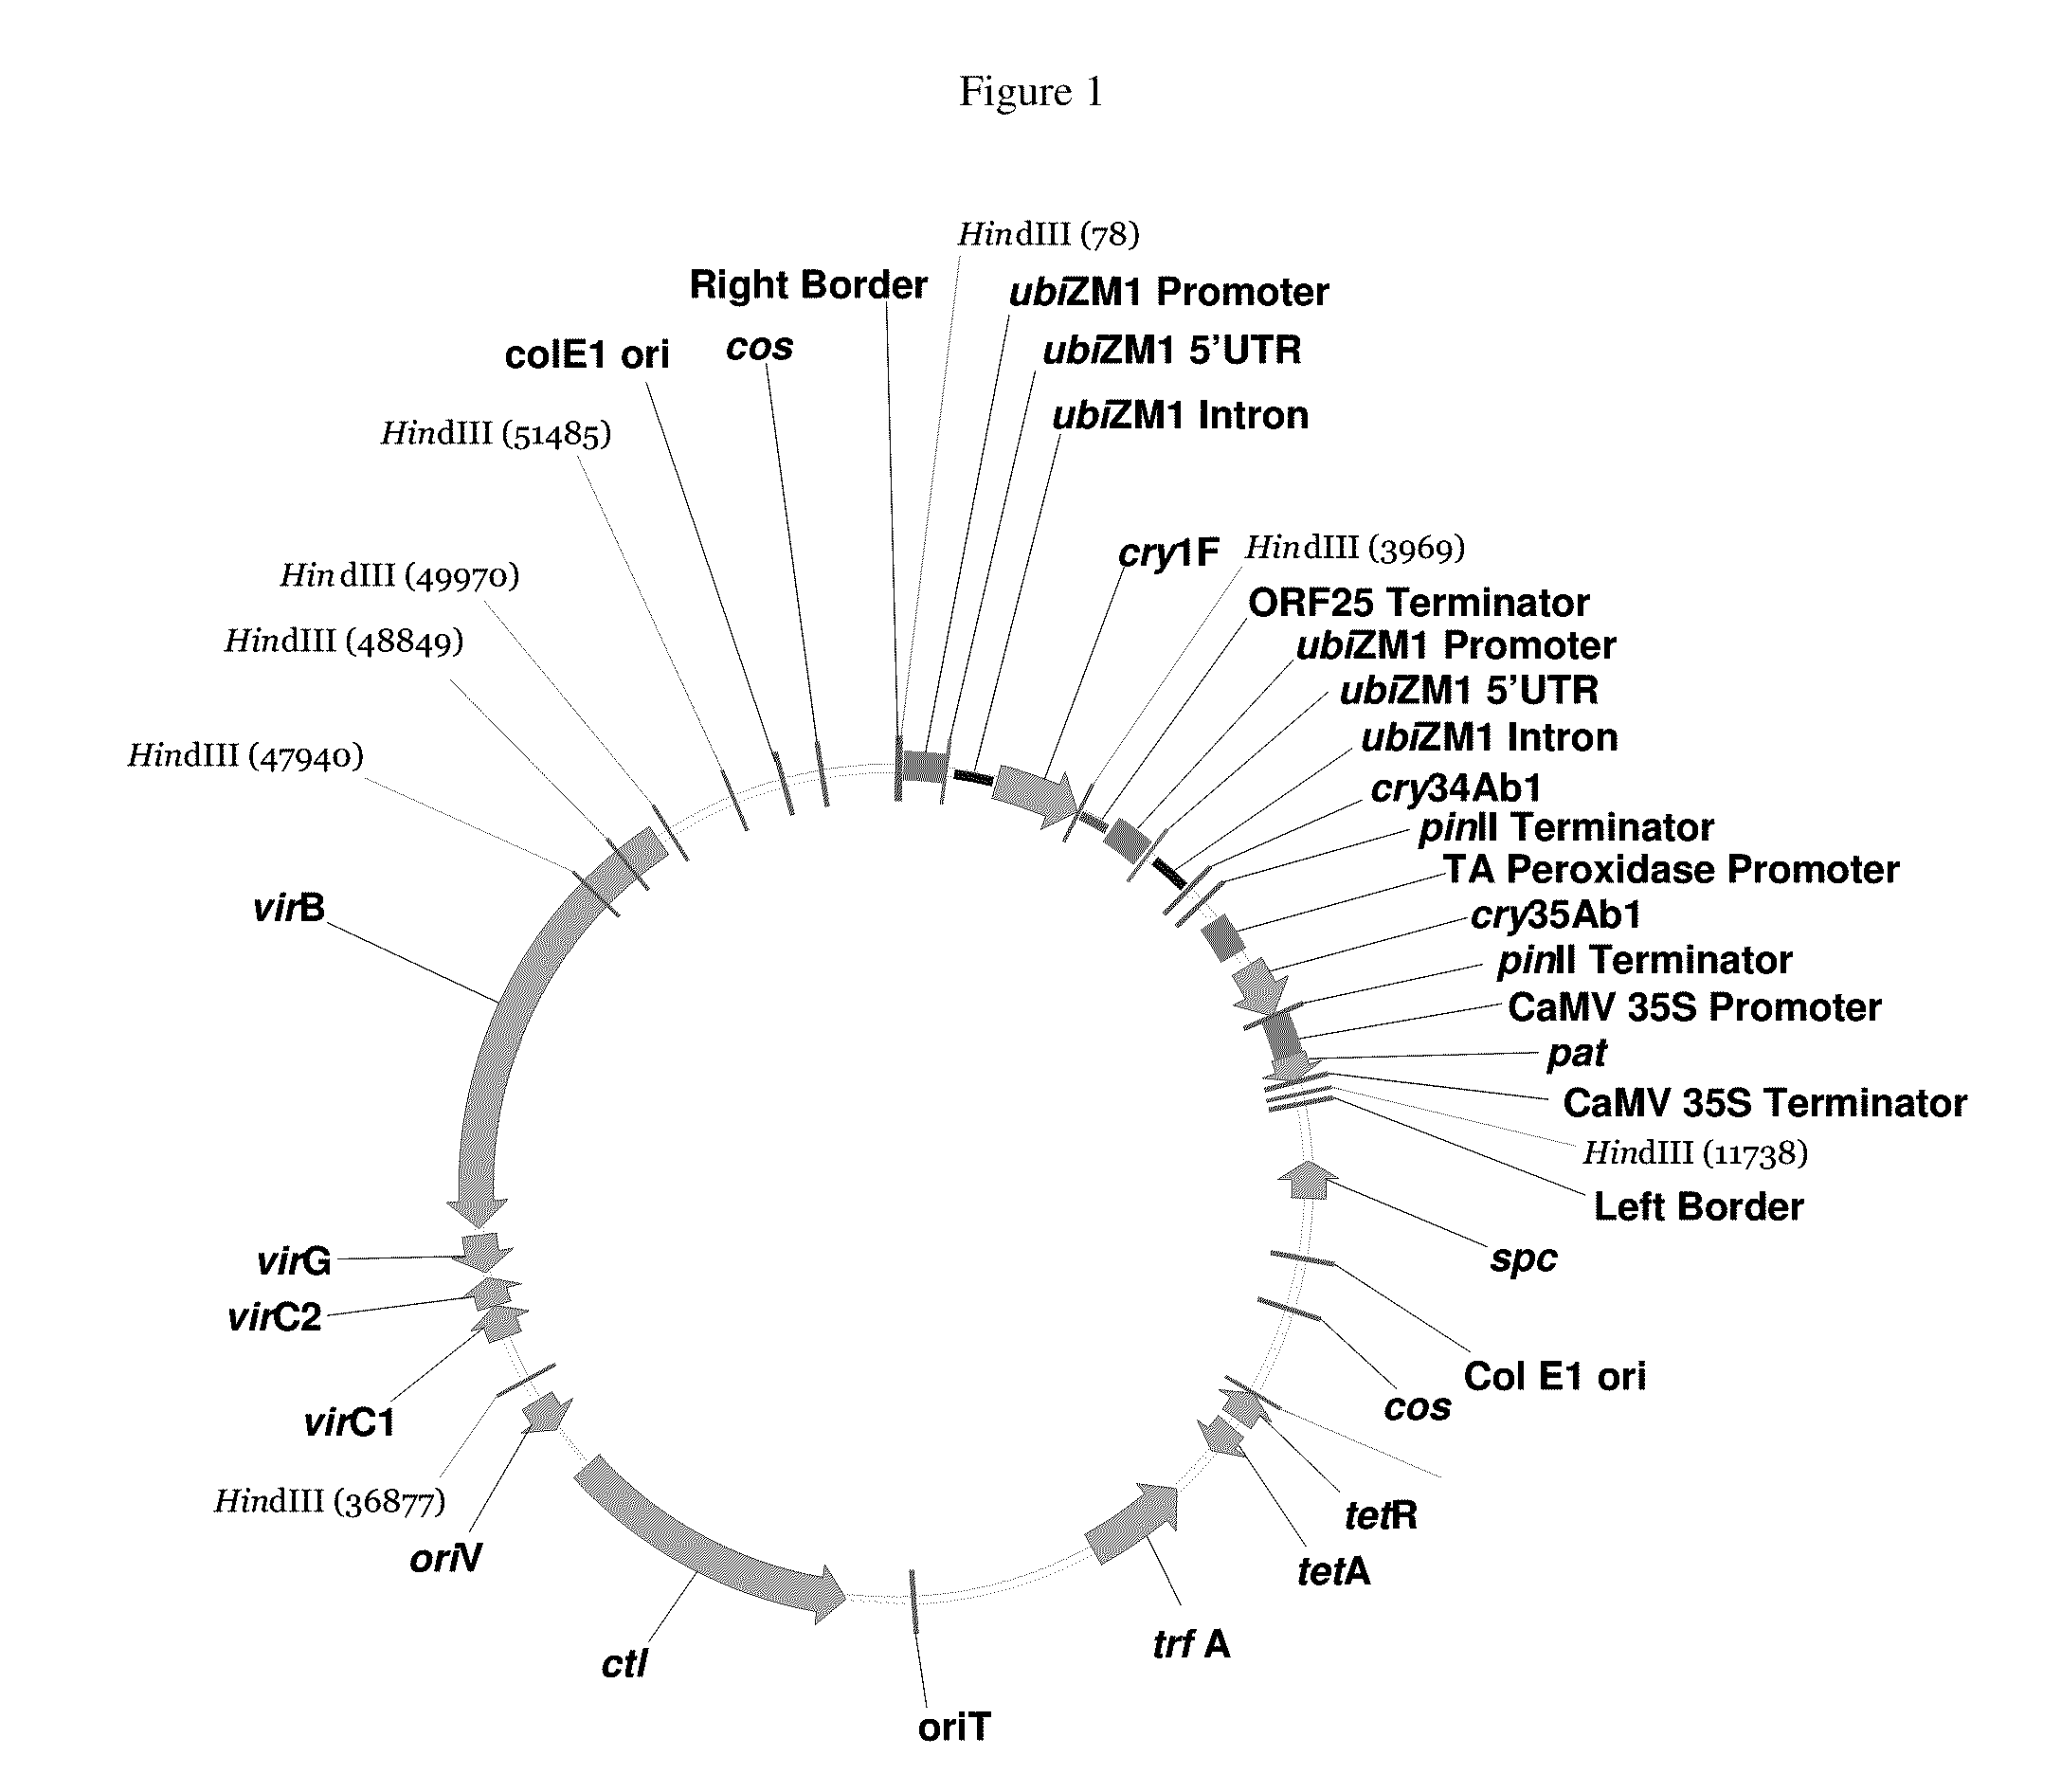 Maize event DP-004114-3 and methods for detection thereof